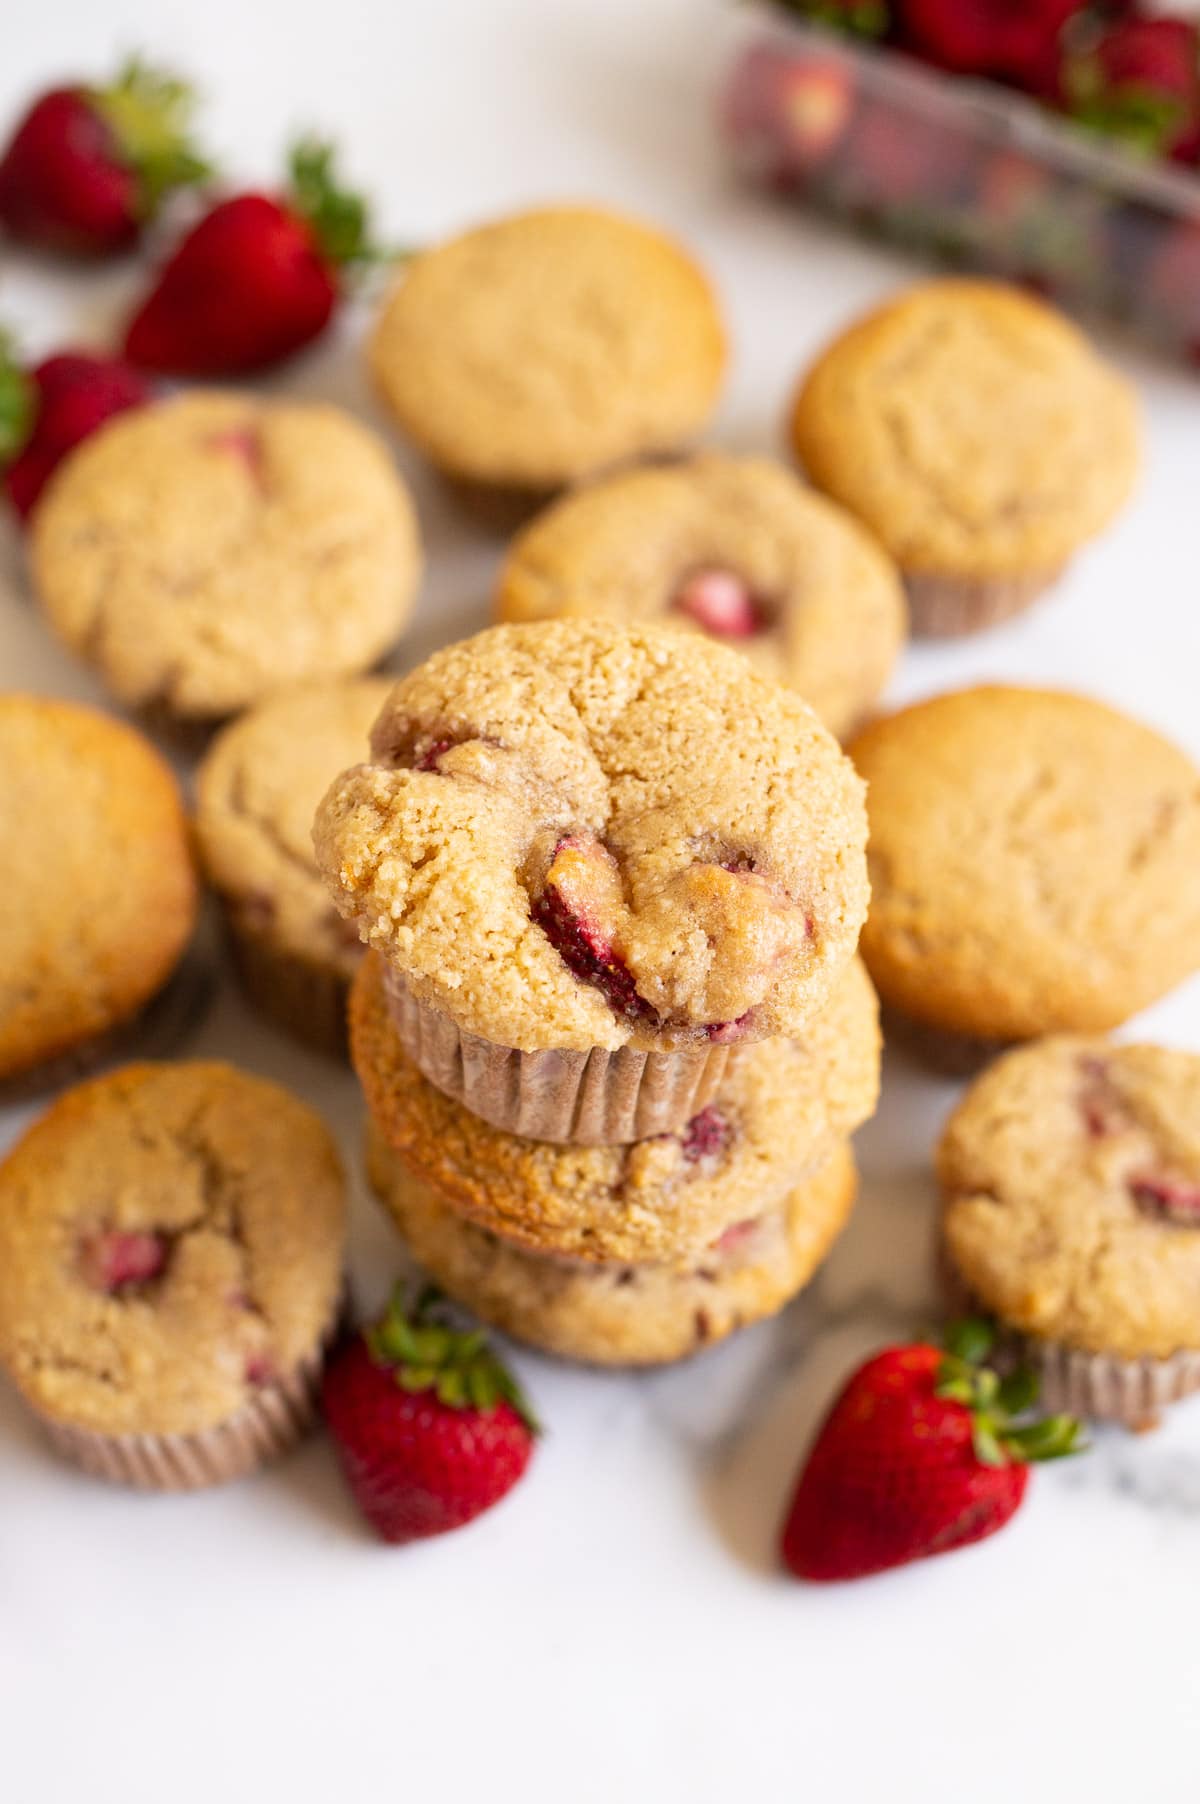 Almond flour muffins with strawberries on a countertop and fresh strawberries around them.